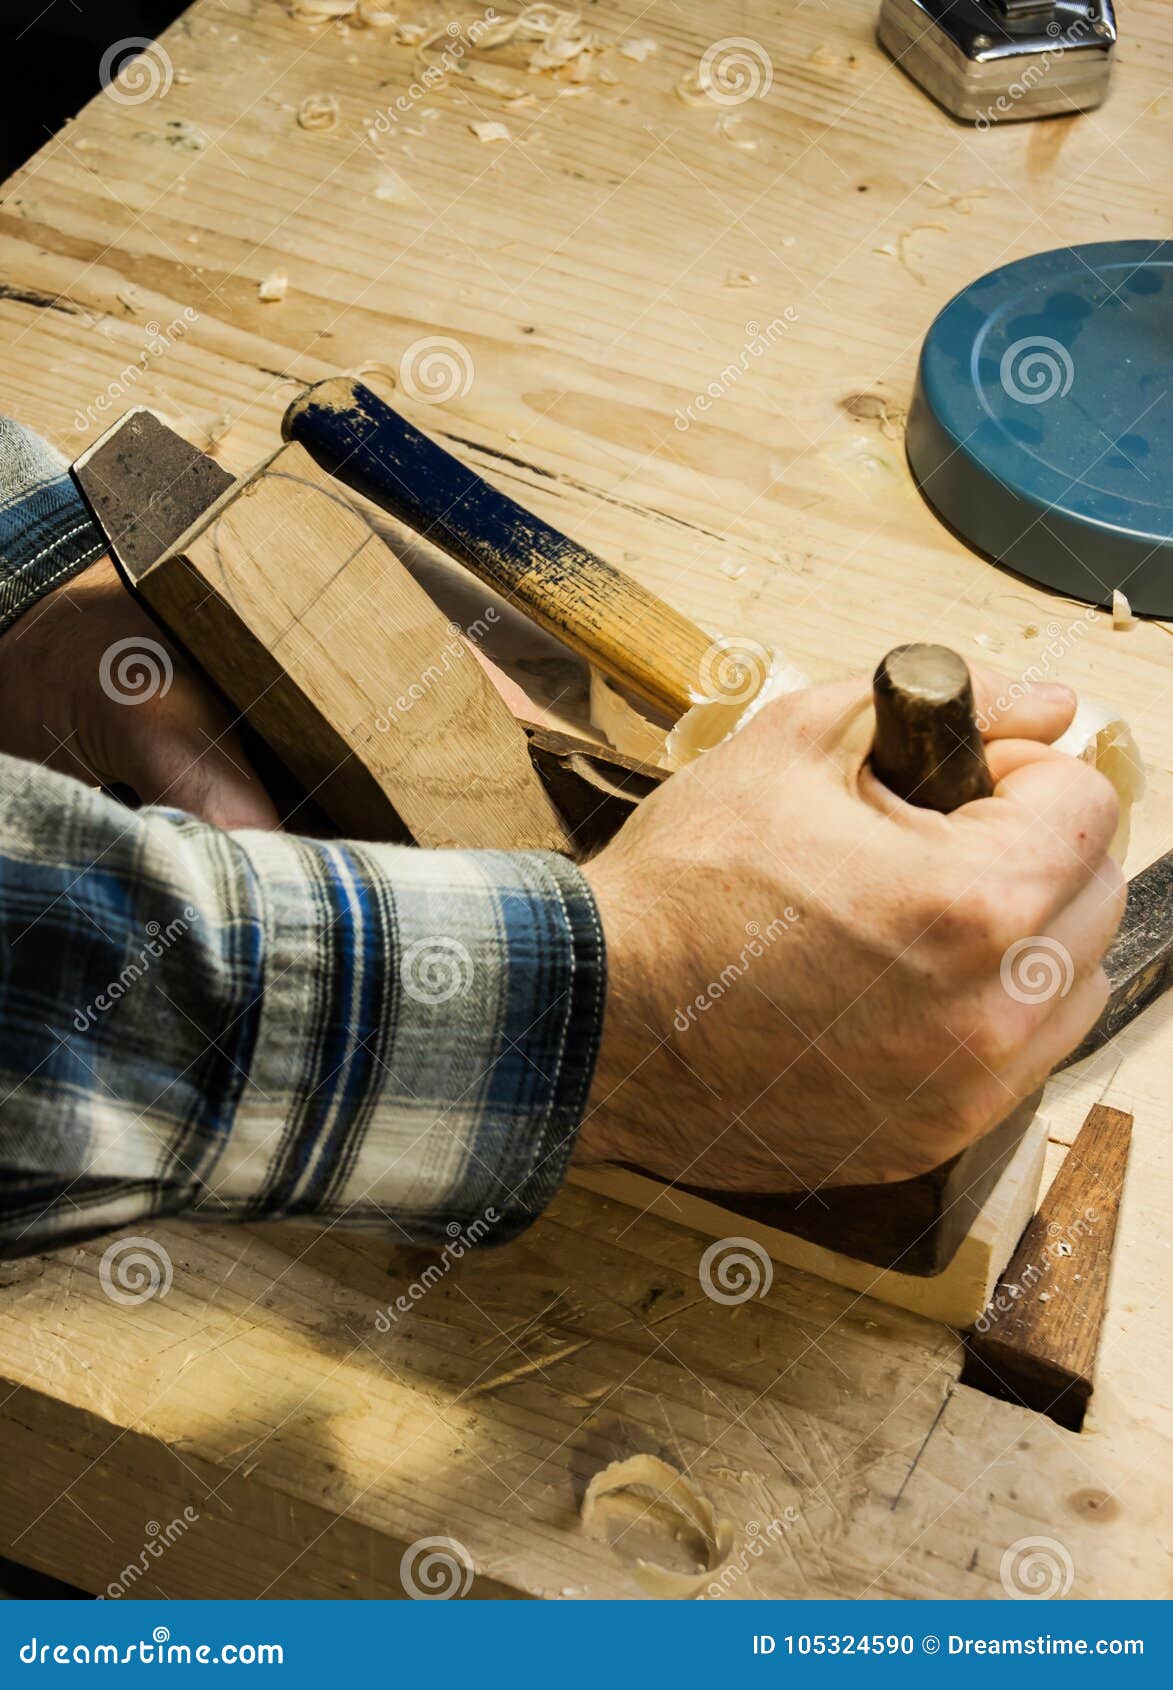 woodworkers hands on an old fashion hand plane